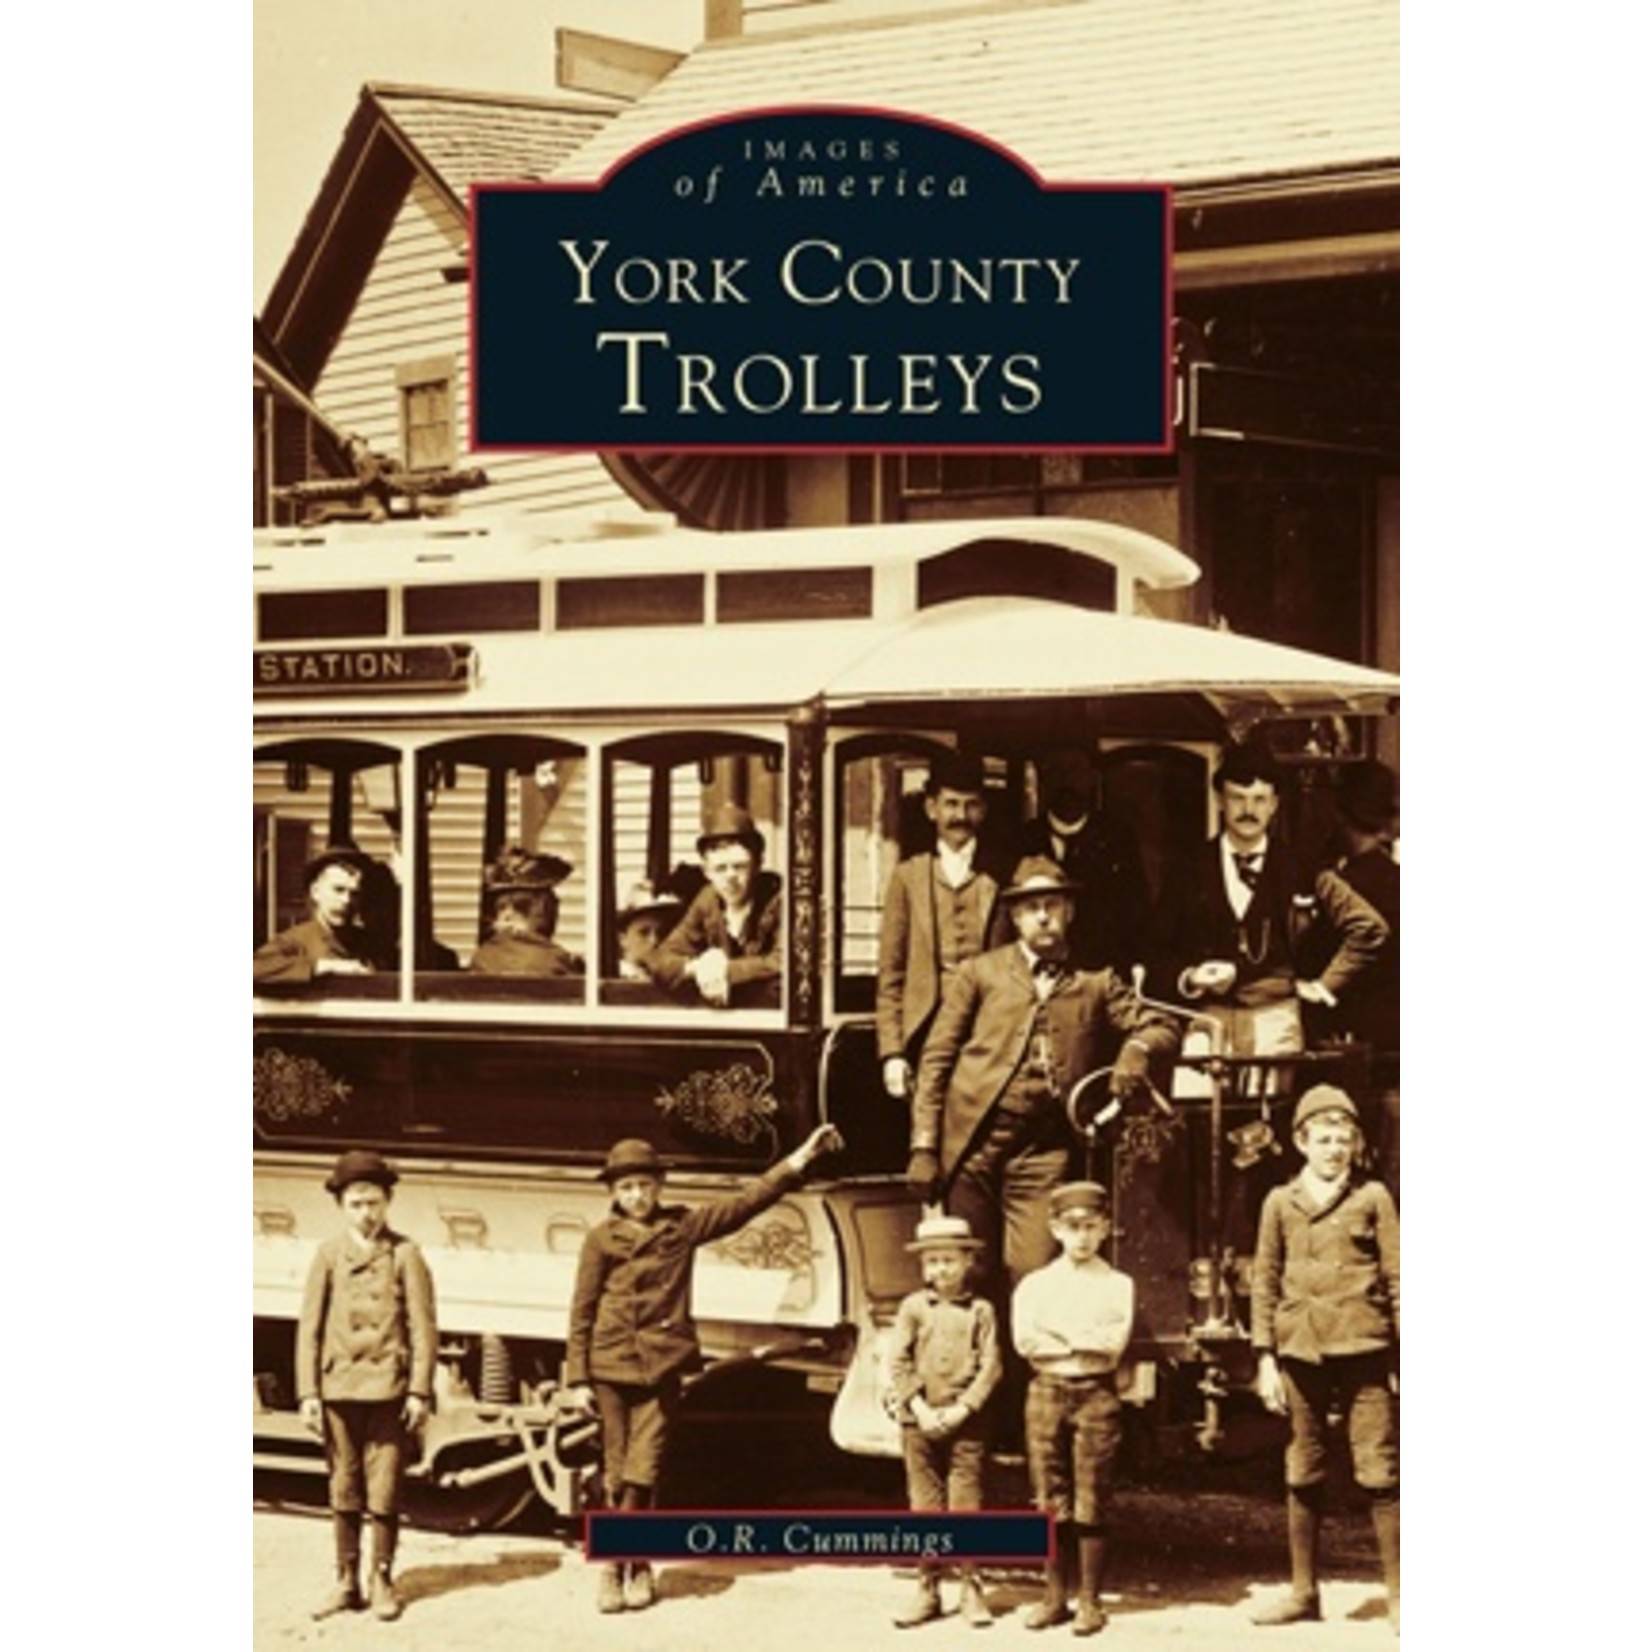 Images of America York County Trolleys